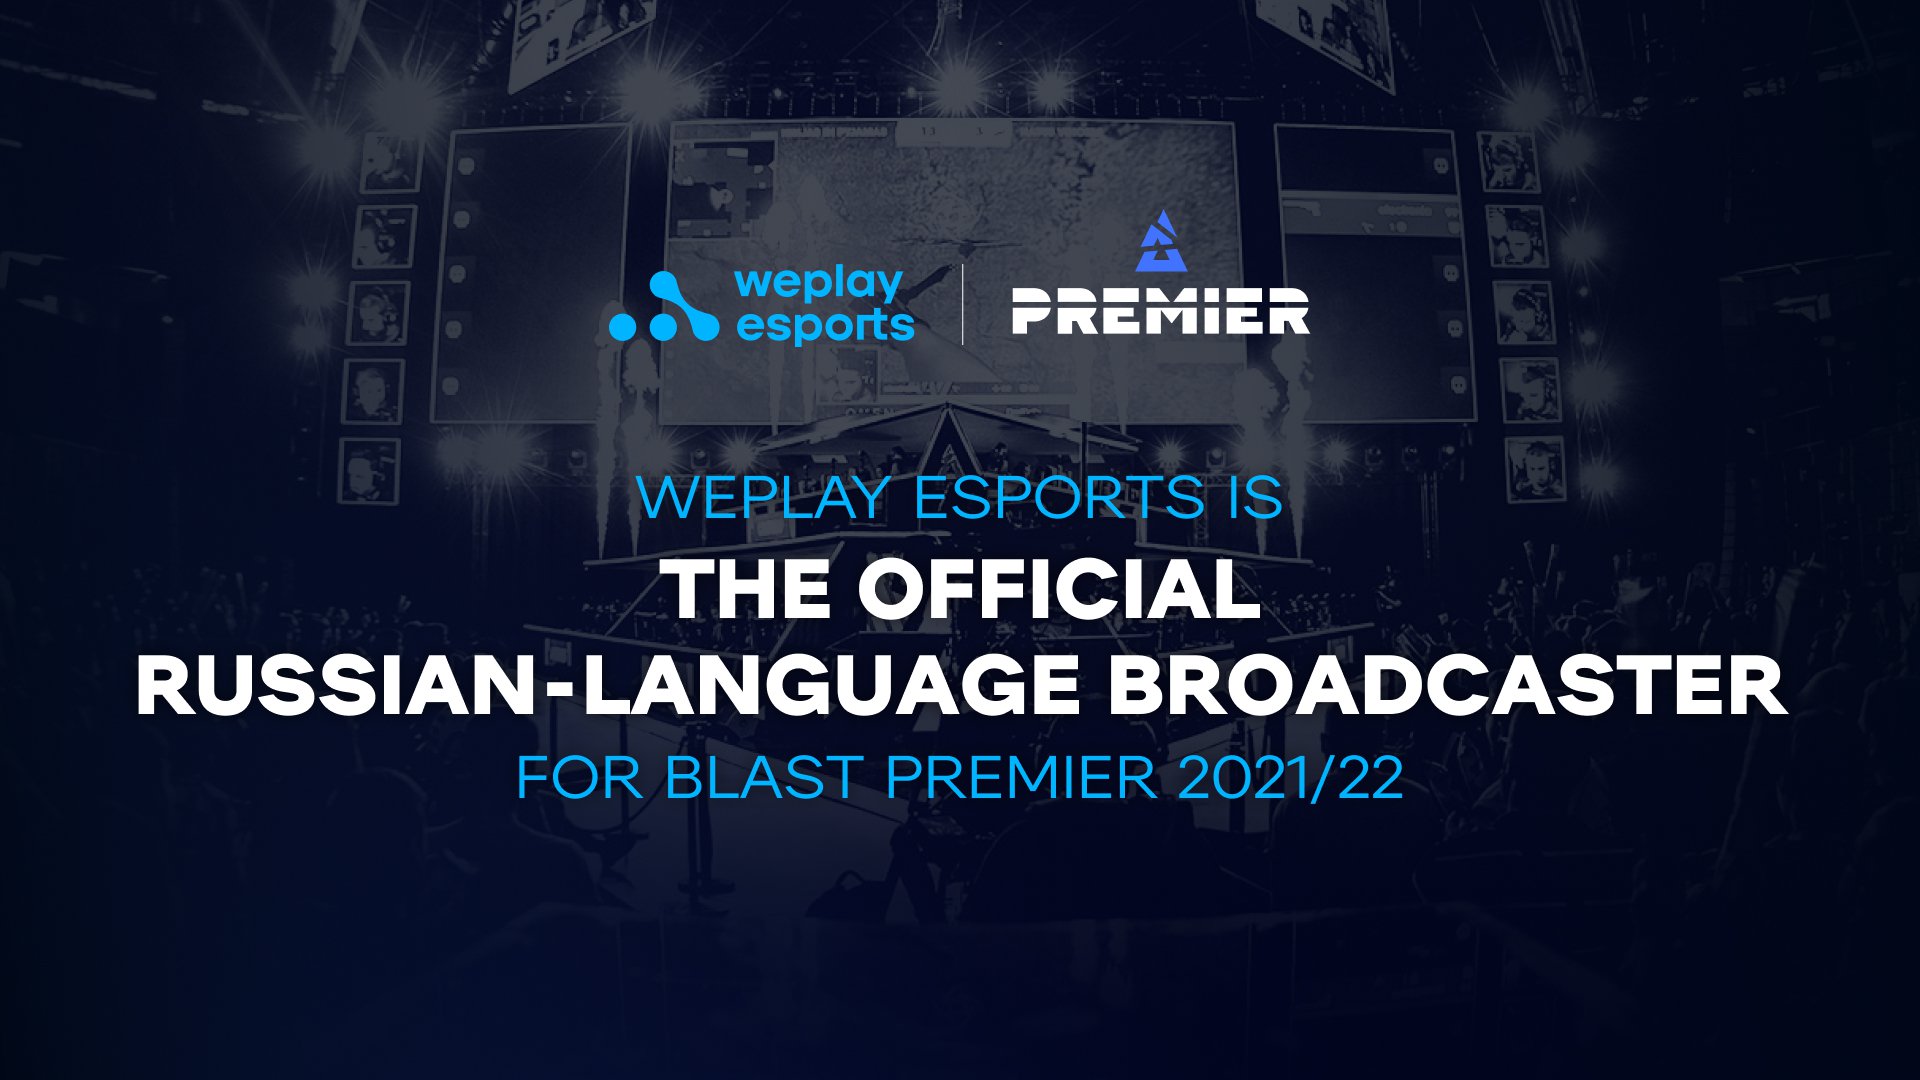 WePlay Esports is the official Russian-language broadcaster for BLAST Premier 2021/22. Image: WePlay Holding